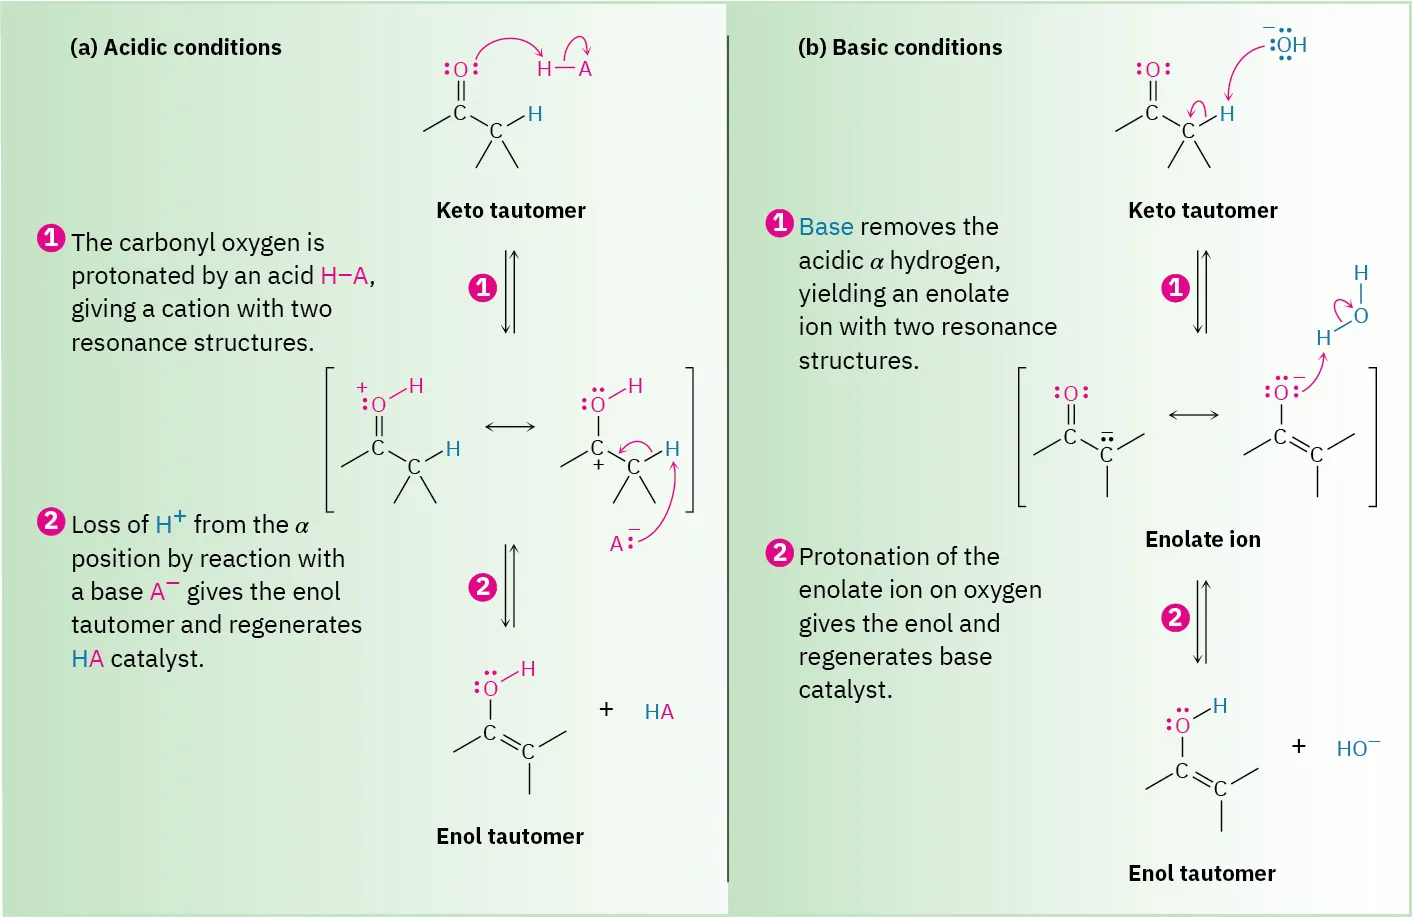 Reaction mechanisms for keto enol tautomerism under acidic and basic conditions.